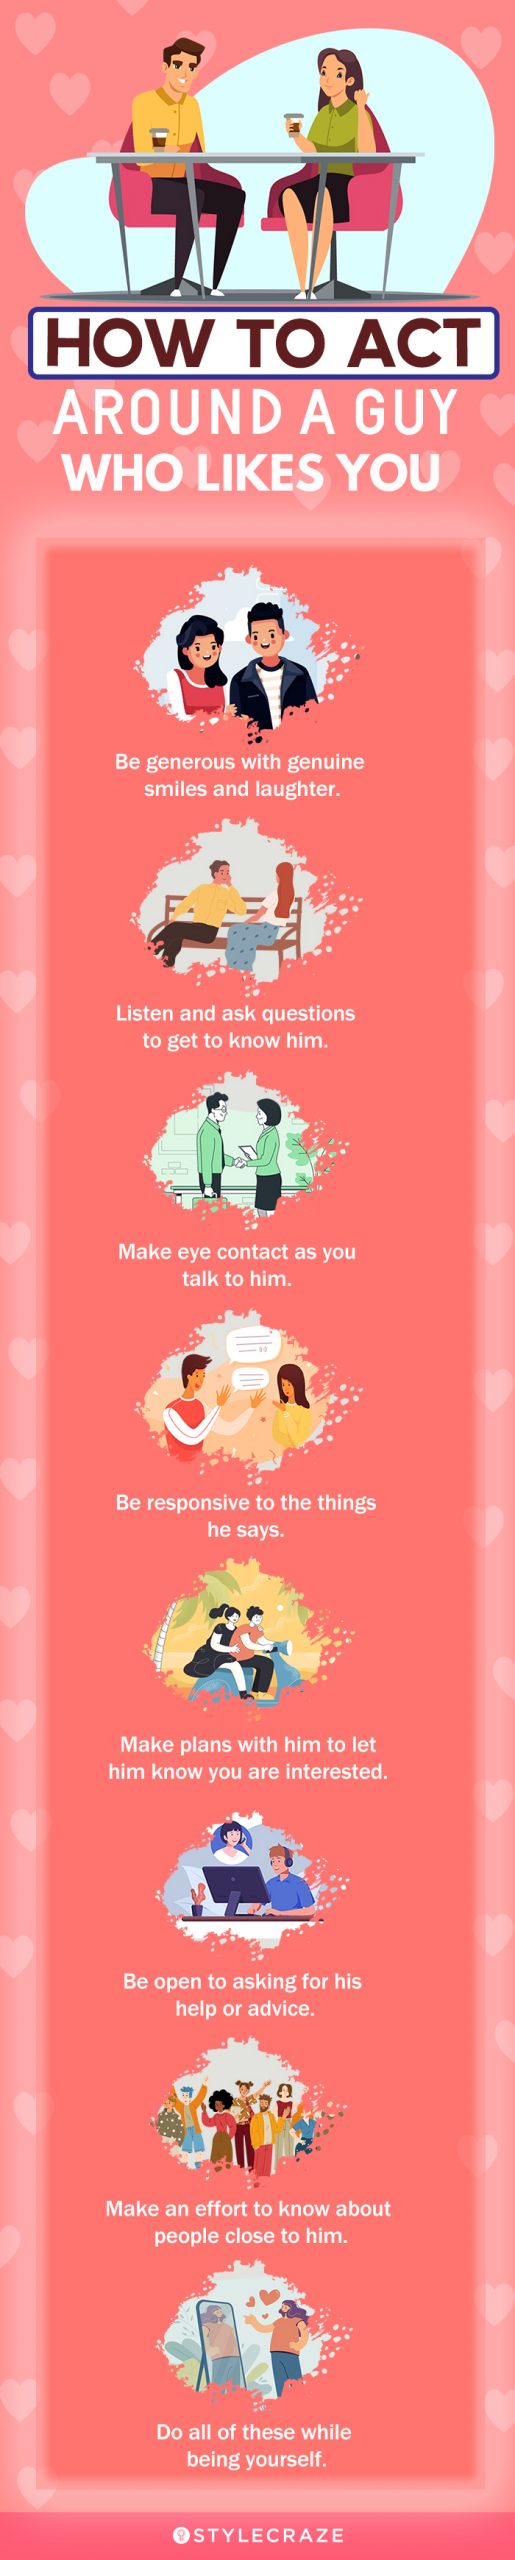 how to act around a guy who likes you (infographic)